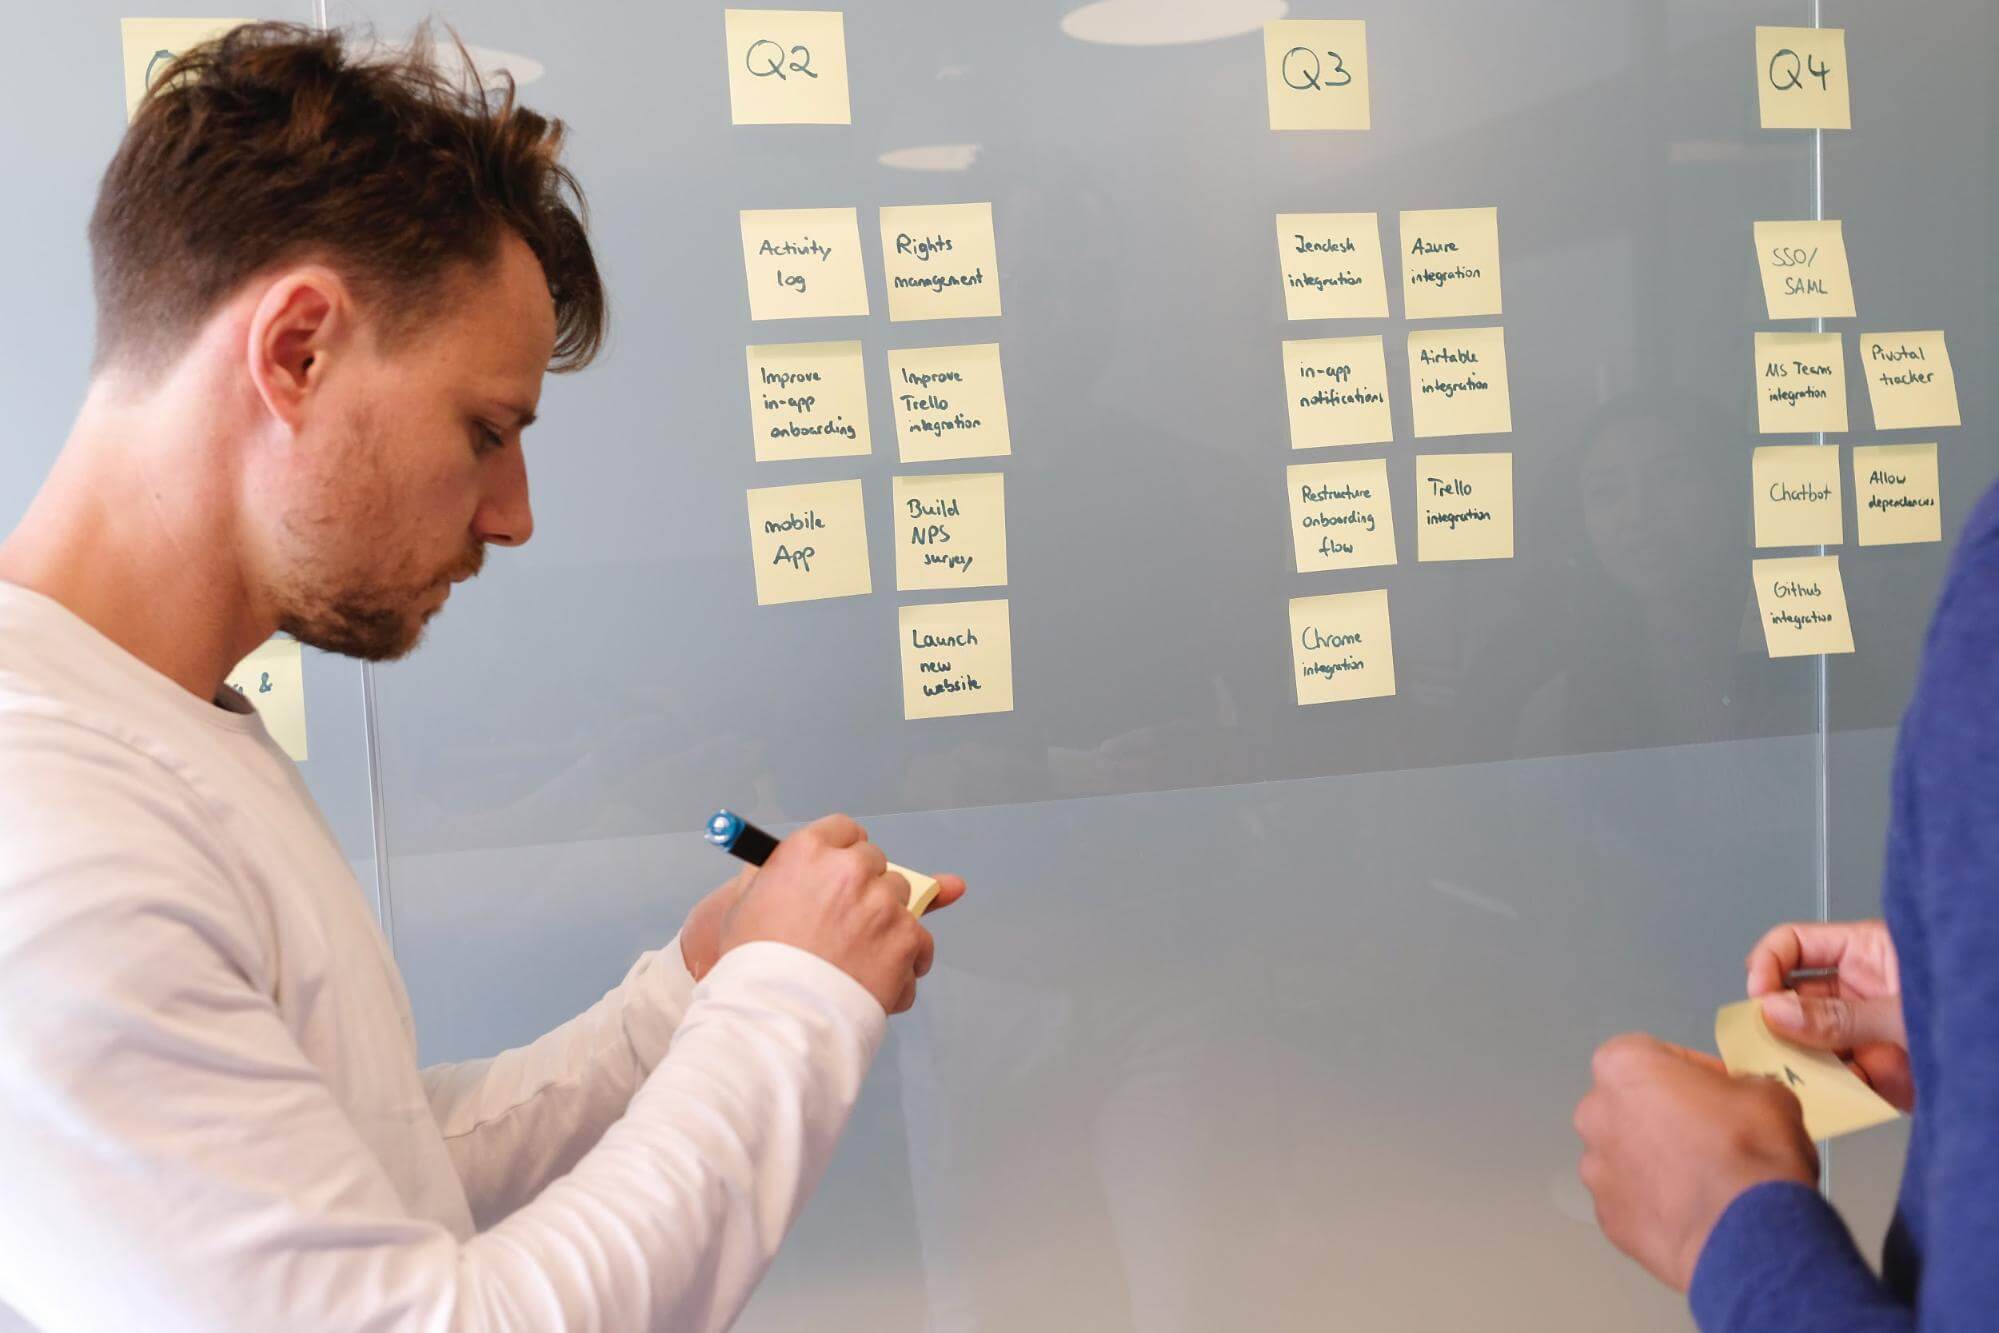 Product managers planning with sticky notes